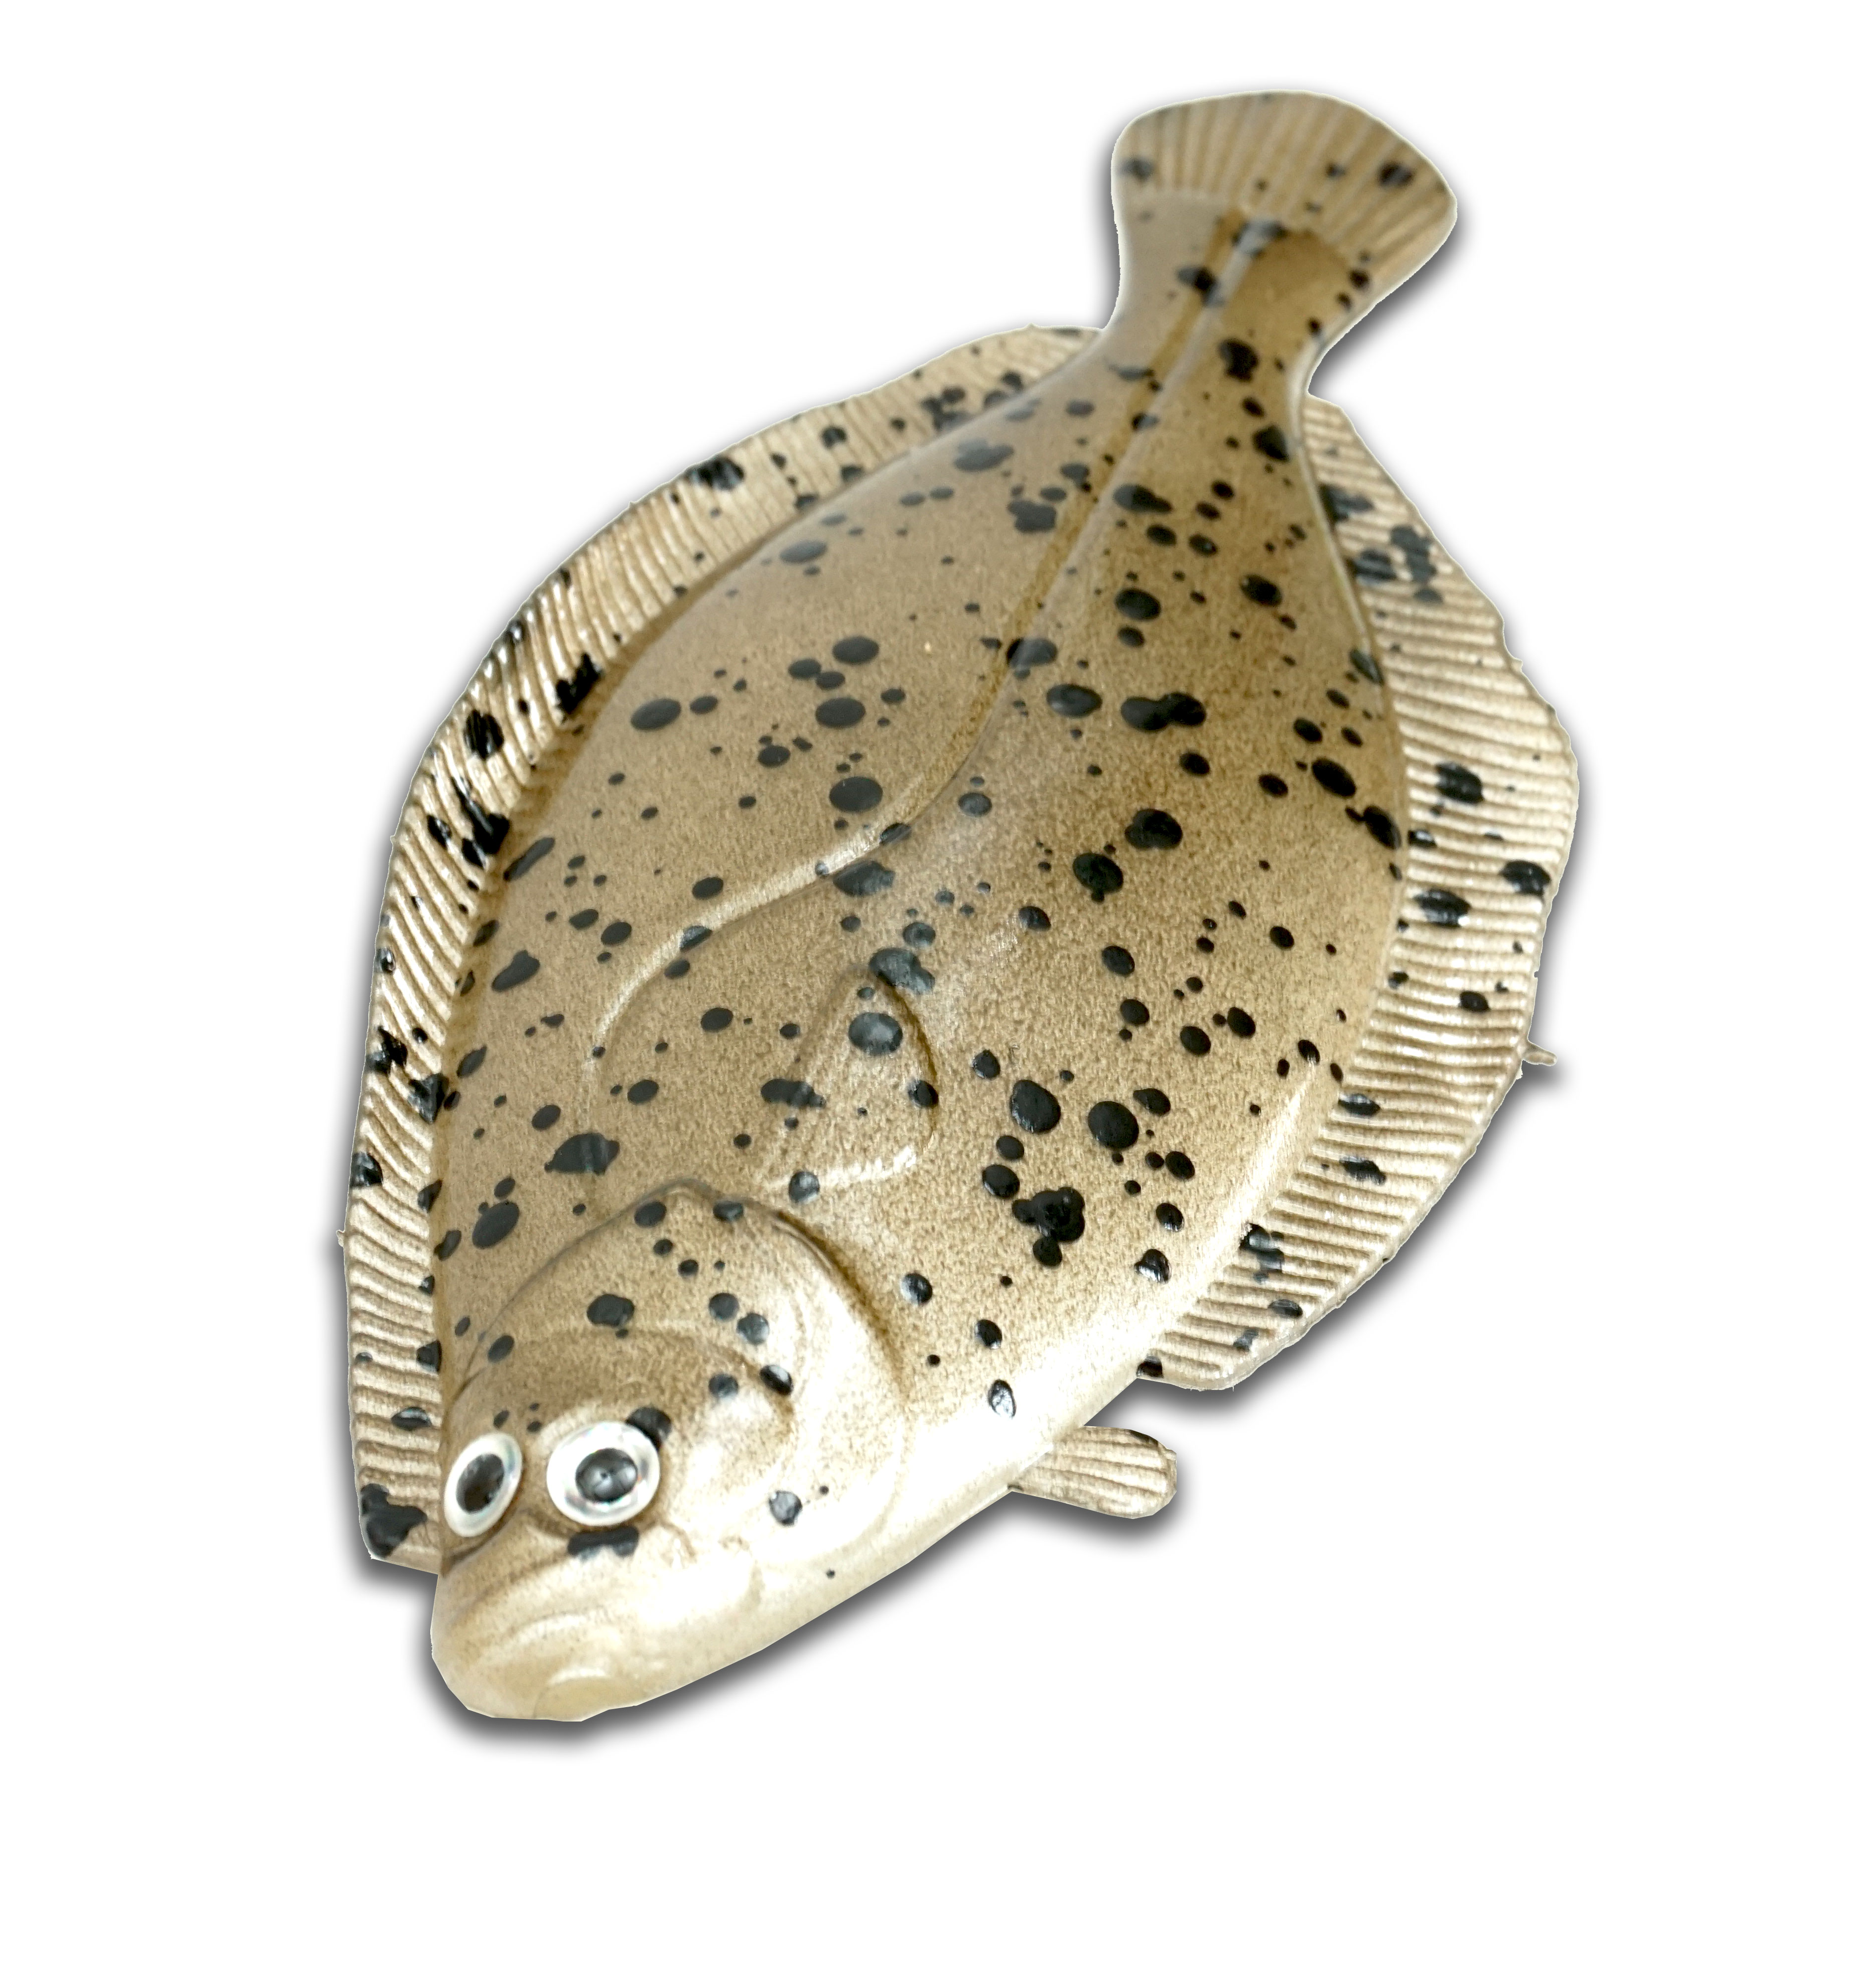 Artificial Flounder 5 Light Spotted - Almost Alive Lures Artificial Flounder  5 Light Spotted AAFL-6 $2.49 [AAFL-6] - $2.49 : Almost Alive Lures, The  best there ever was.